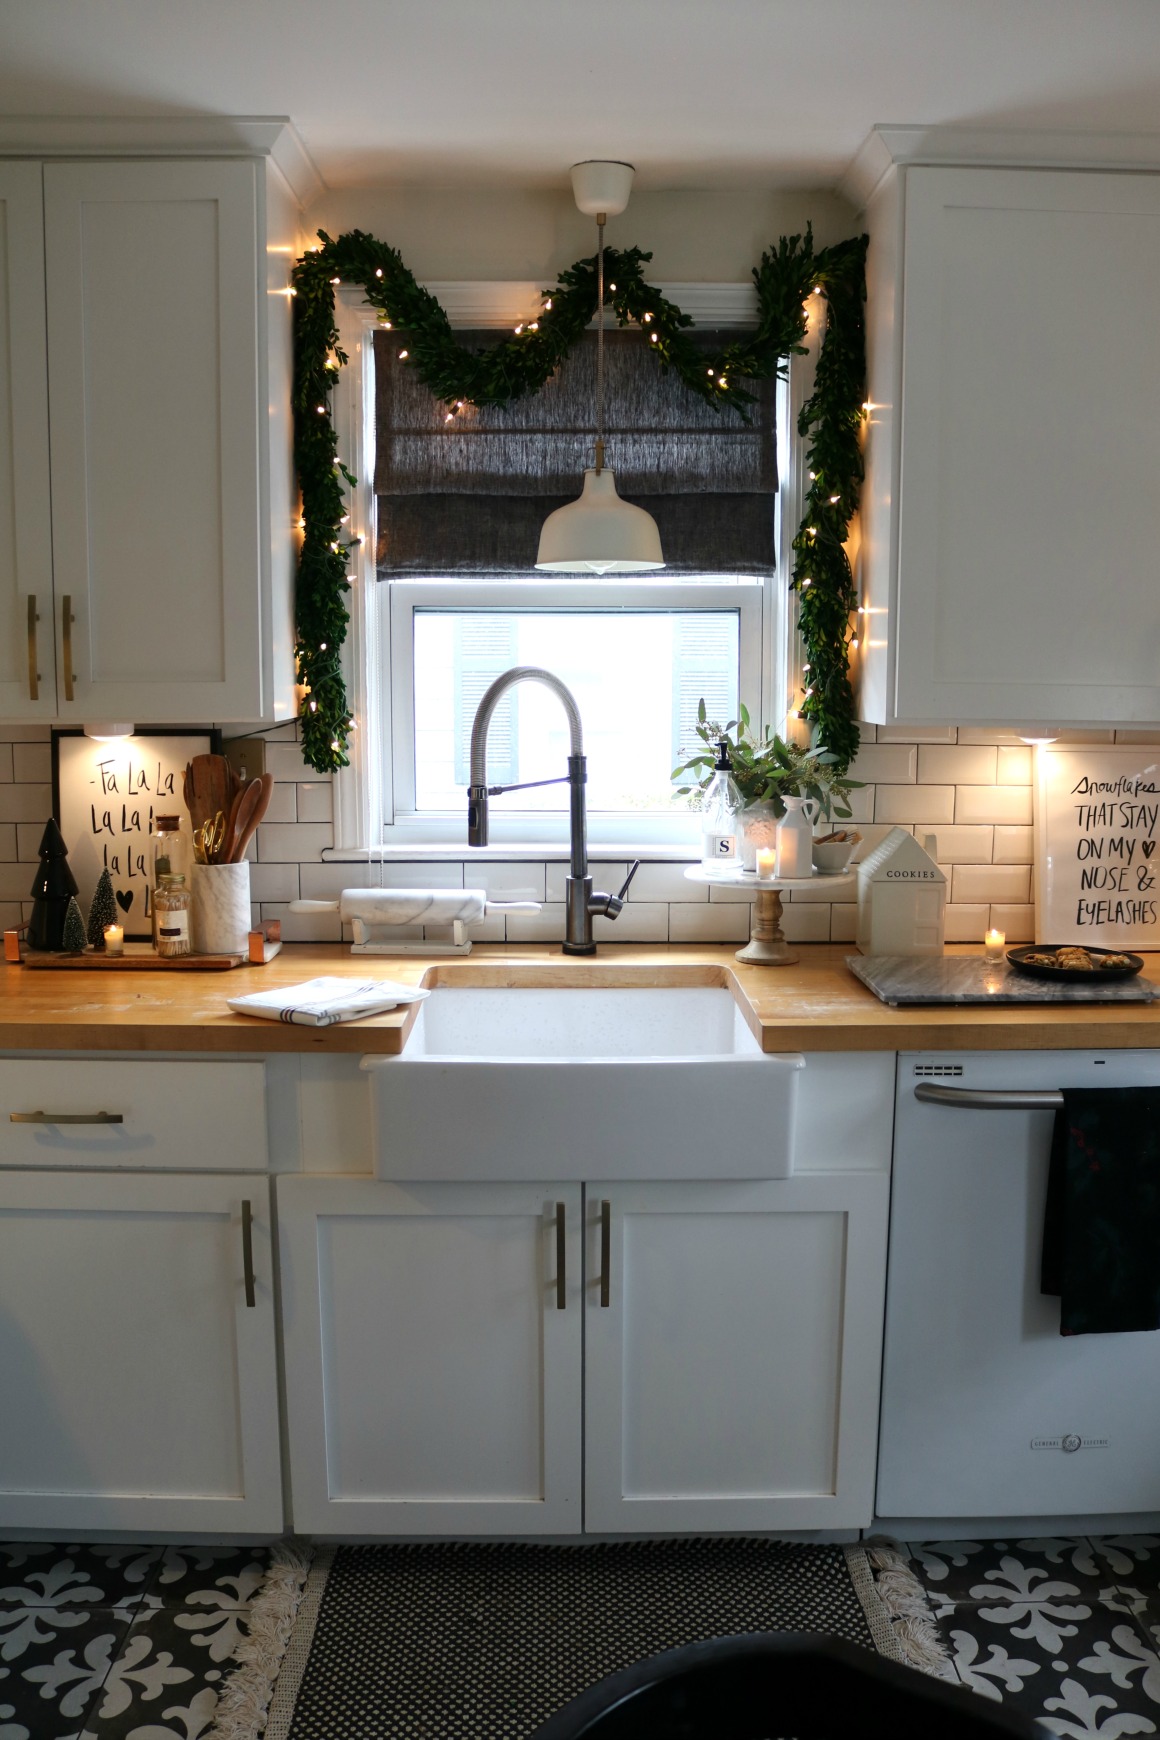 How to Create a Cozy Kitchen at Christmas 